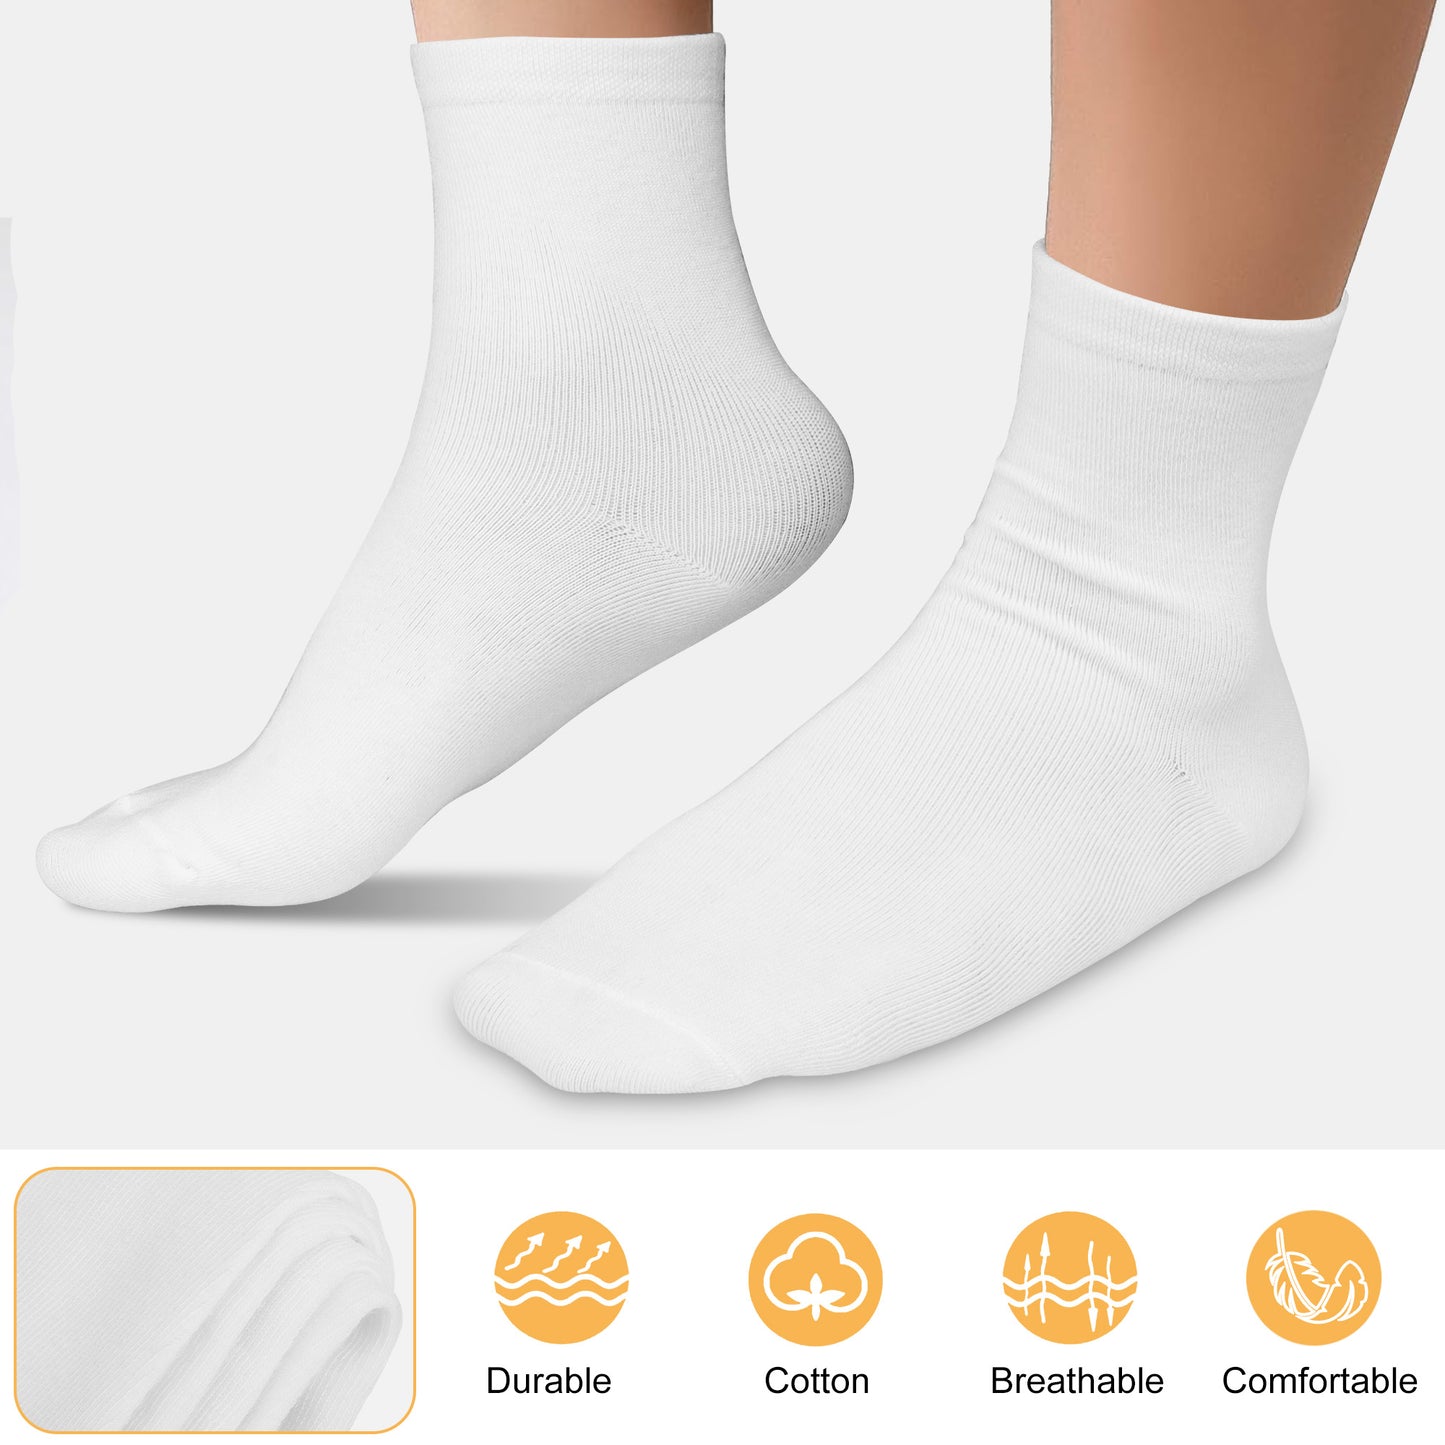 6 Pairs Unisex Ankle Socks - suitable for casual and athletic wear providing comfort and style (White)